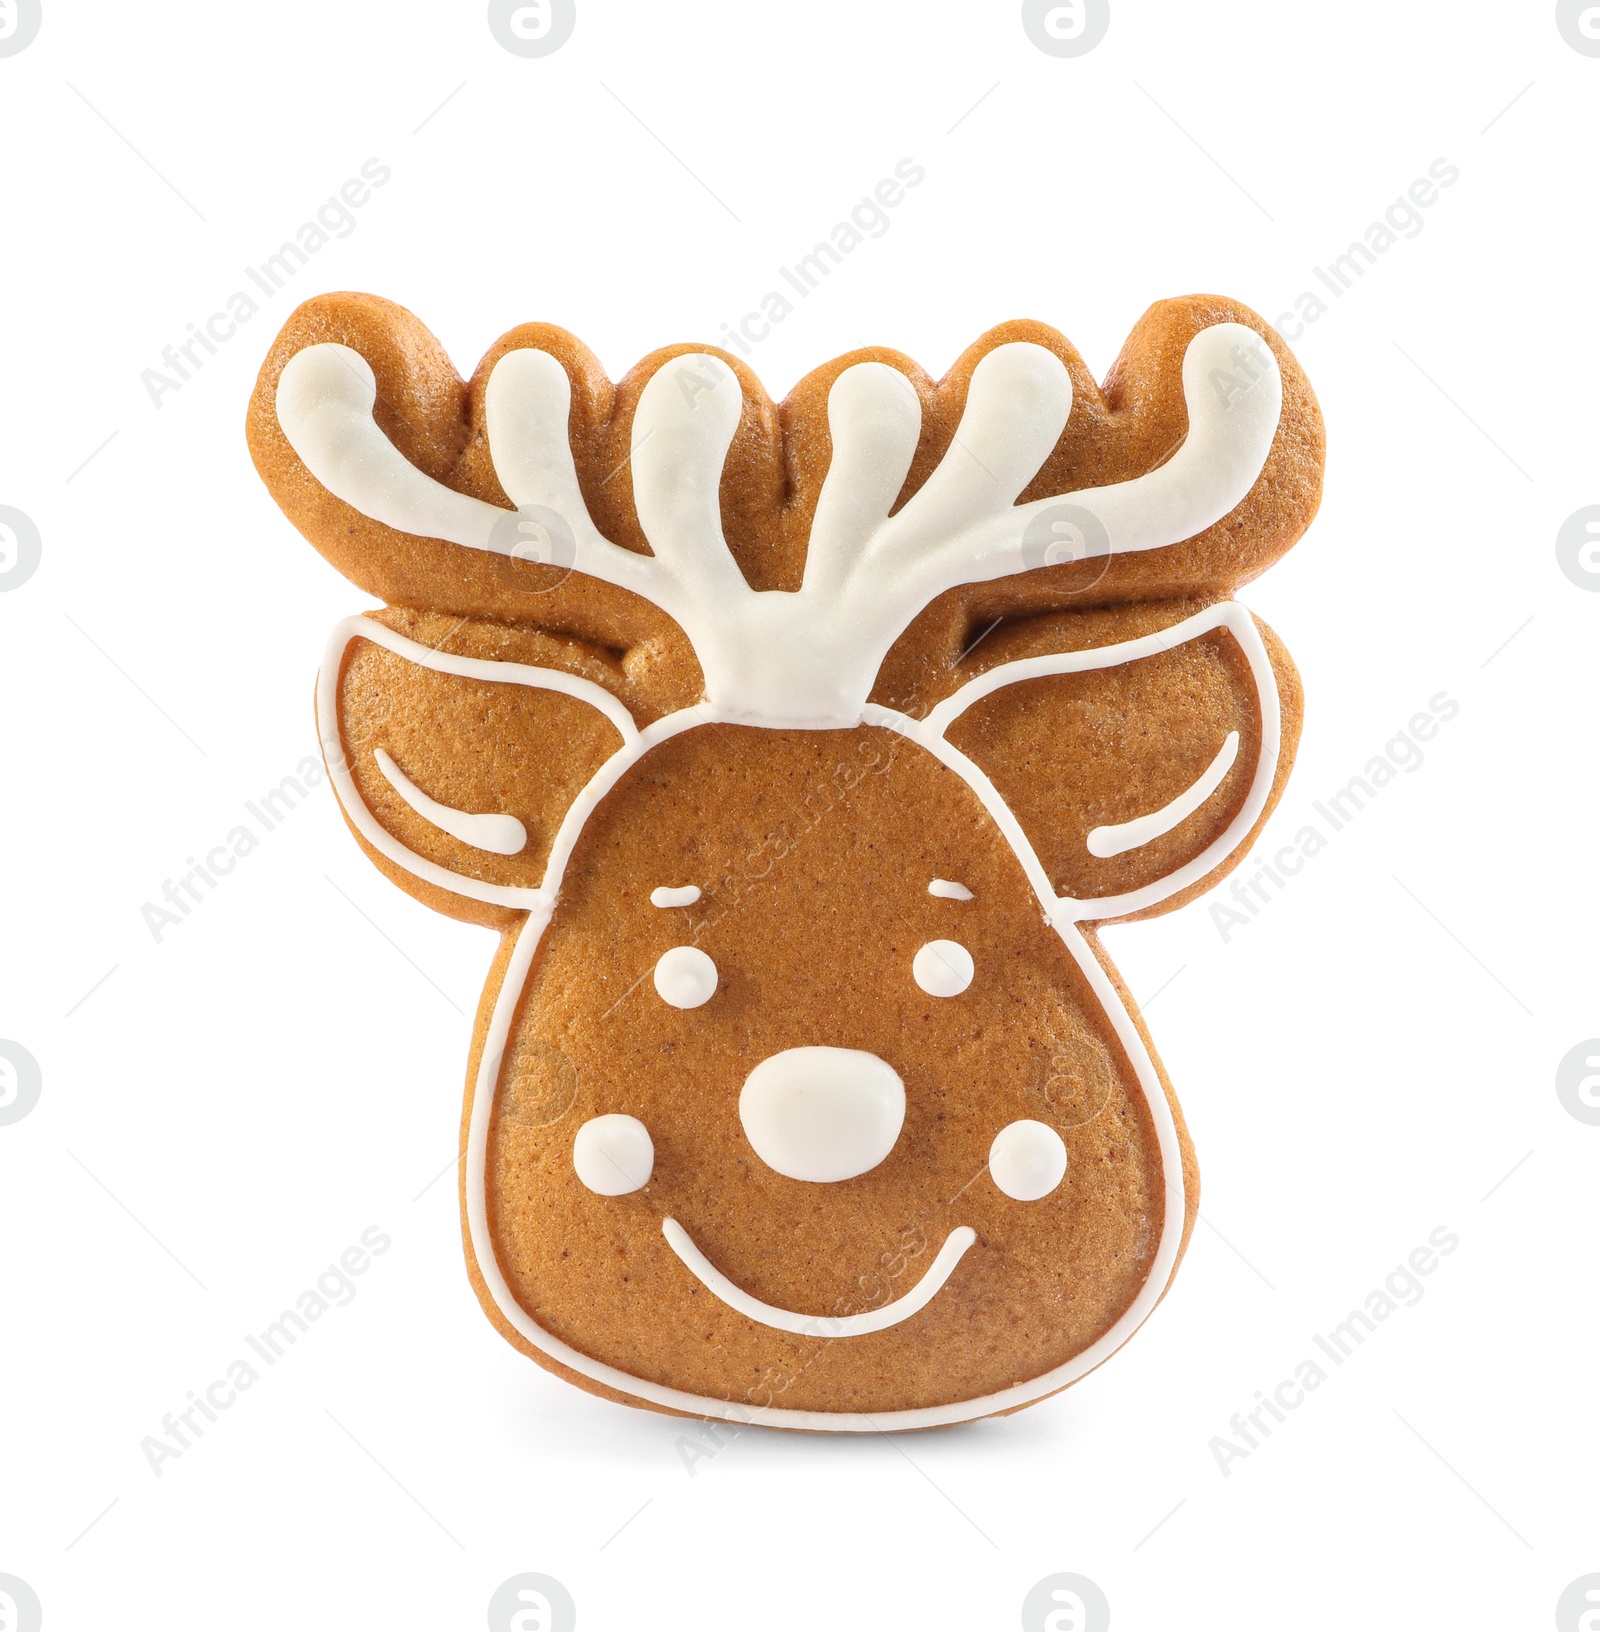 Photo of Deer shaped Christmas cookie isolated on white